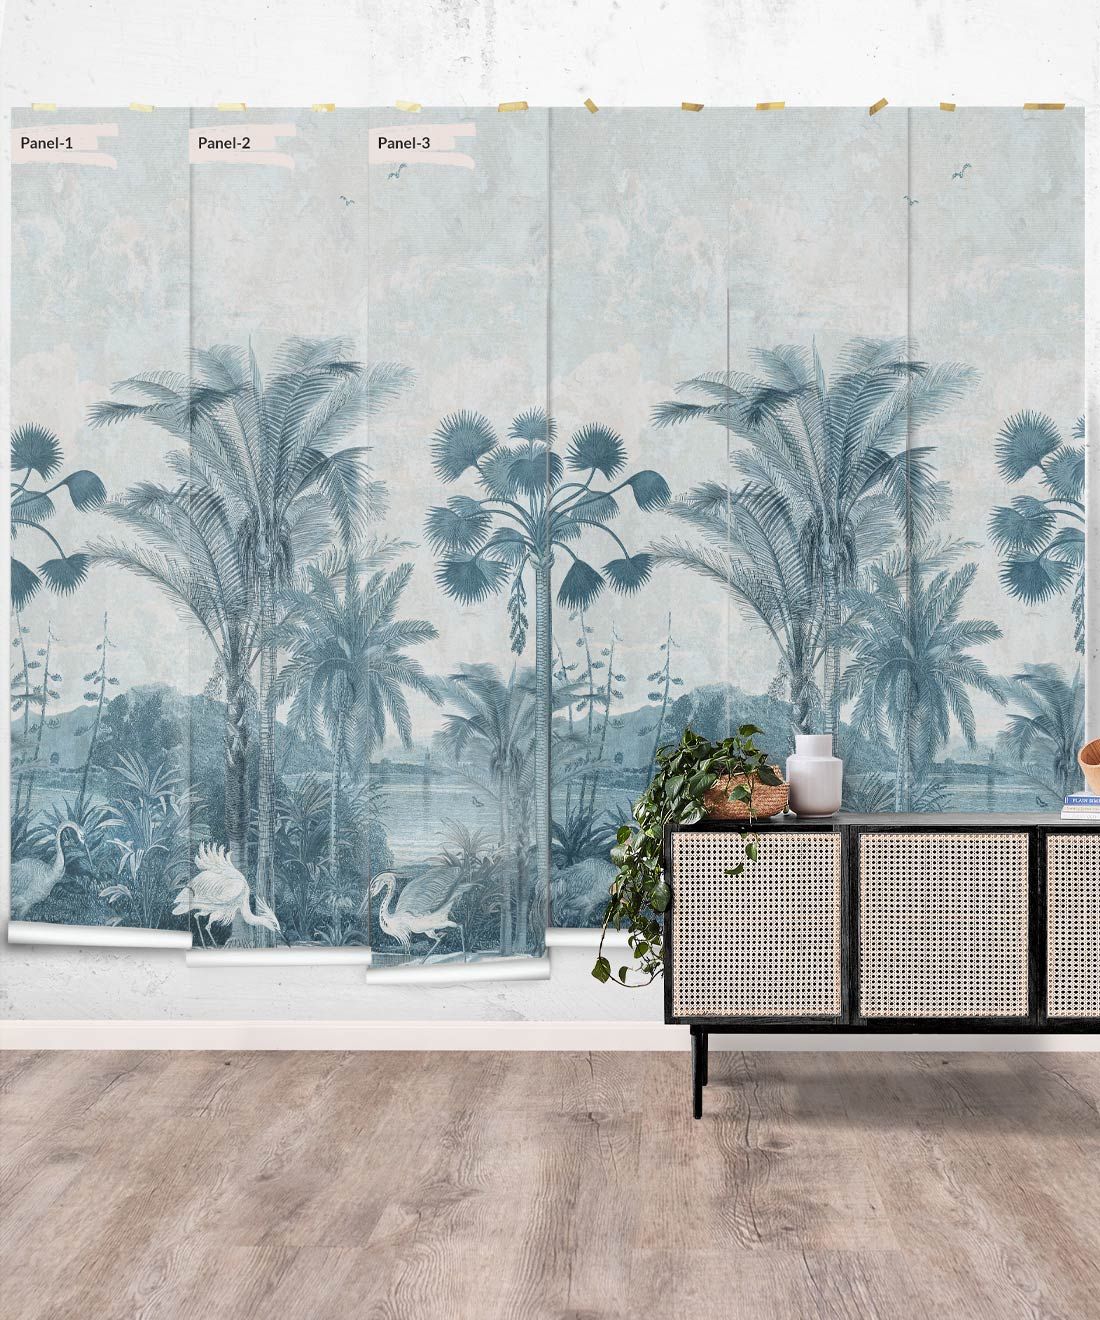 South Asian Subcontinent Wallpaper Mural •Bethany Linz • Palm Tree Mural • Indigo • Panels